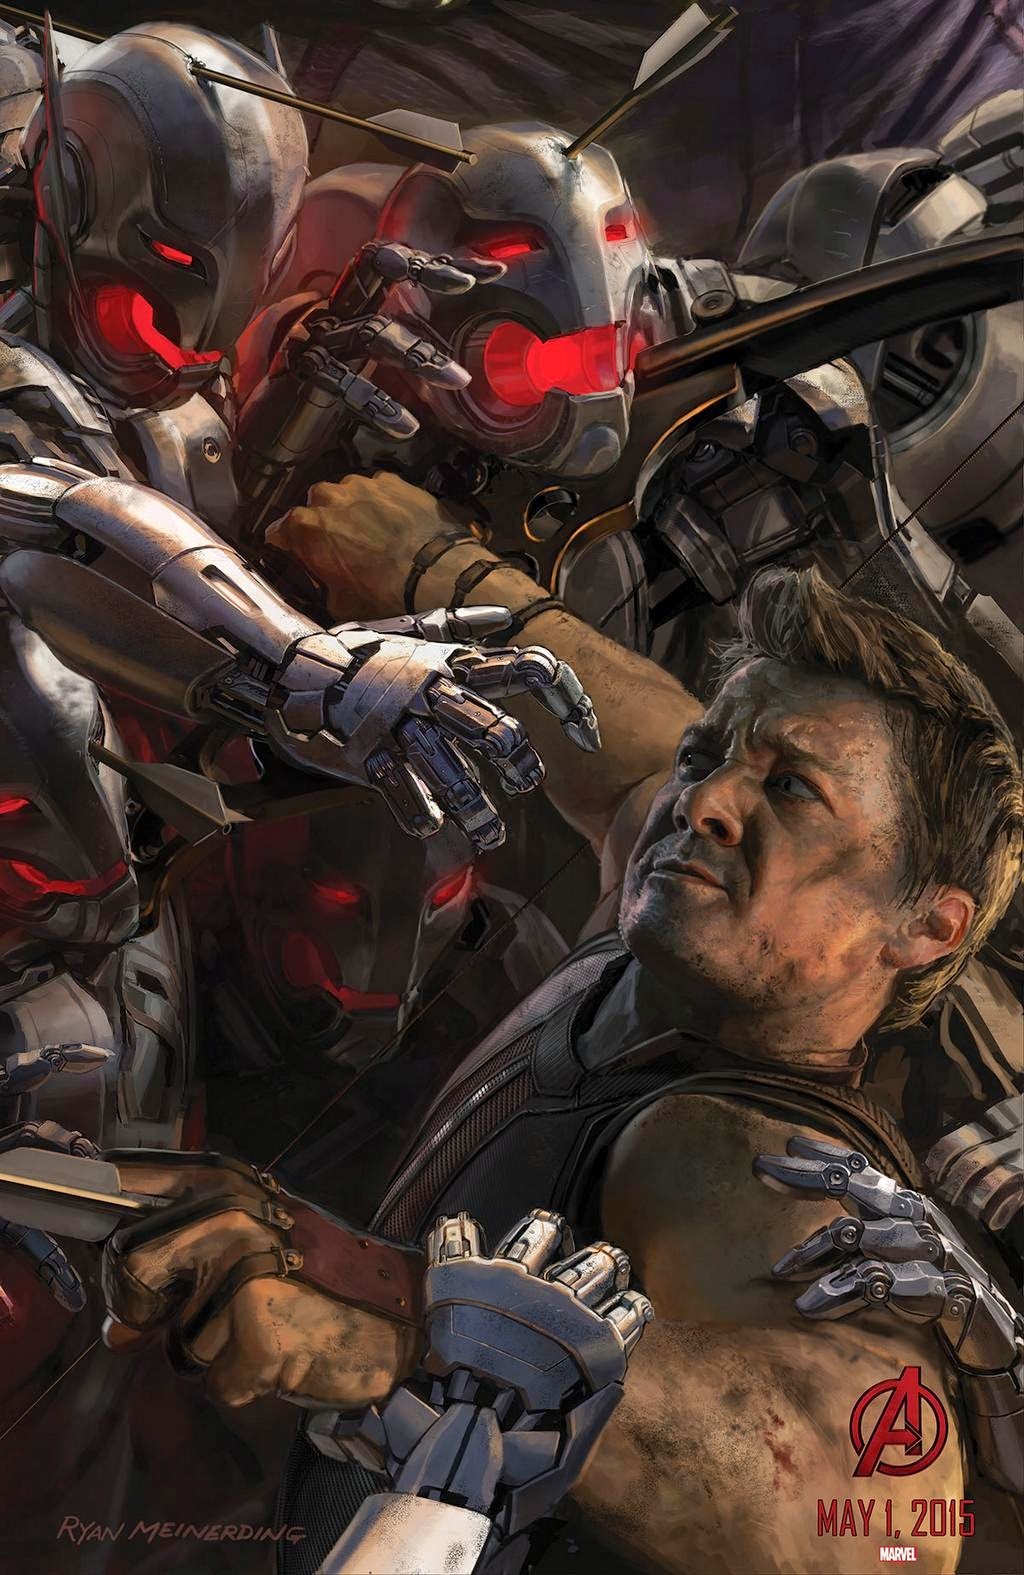 San Diego Comic-Con 2014 Exclusive Avengers Age of Ultron Concept Art Movie Posters by Marvel - Jeremy Renner as Hawkeye